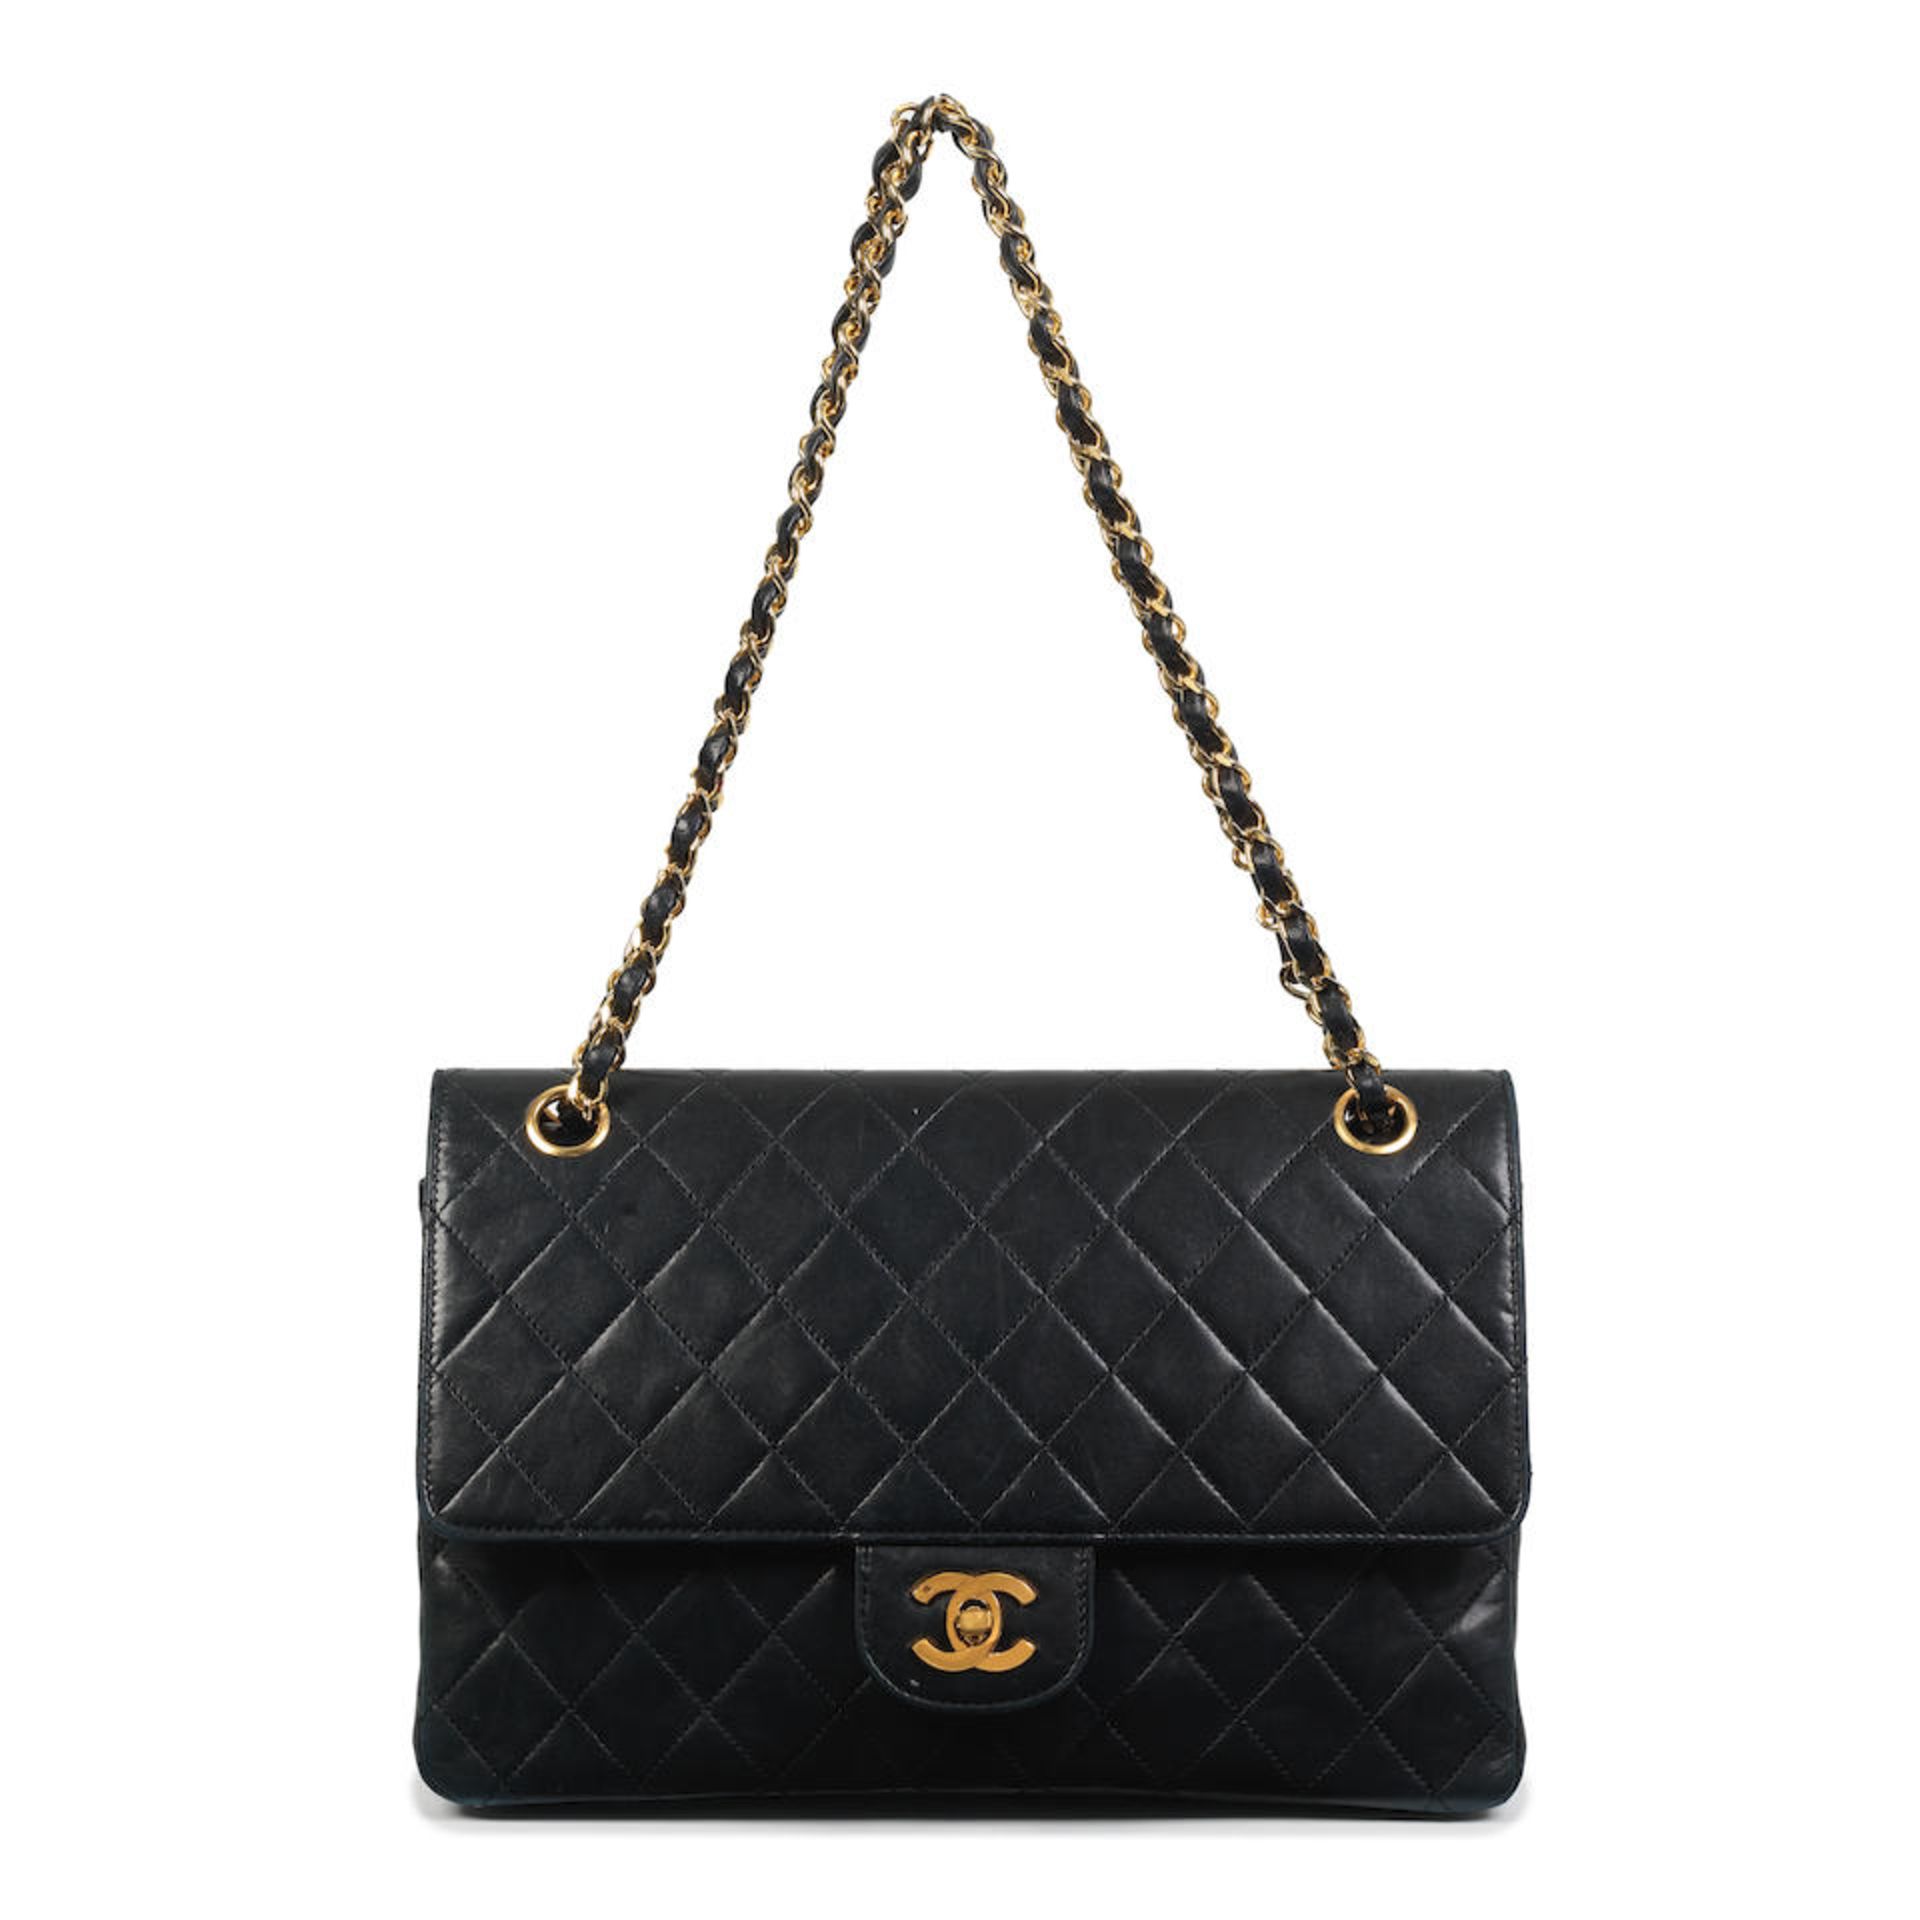 Karl Lagerfeld for Chanel: a Black Quilted Lambskin Classic Double Flap Bag 1989-91 (includes se...